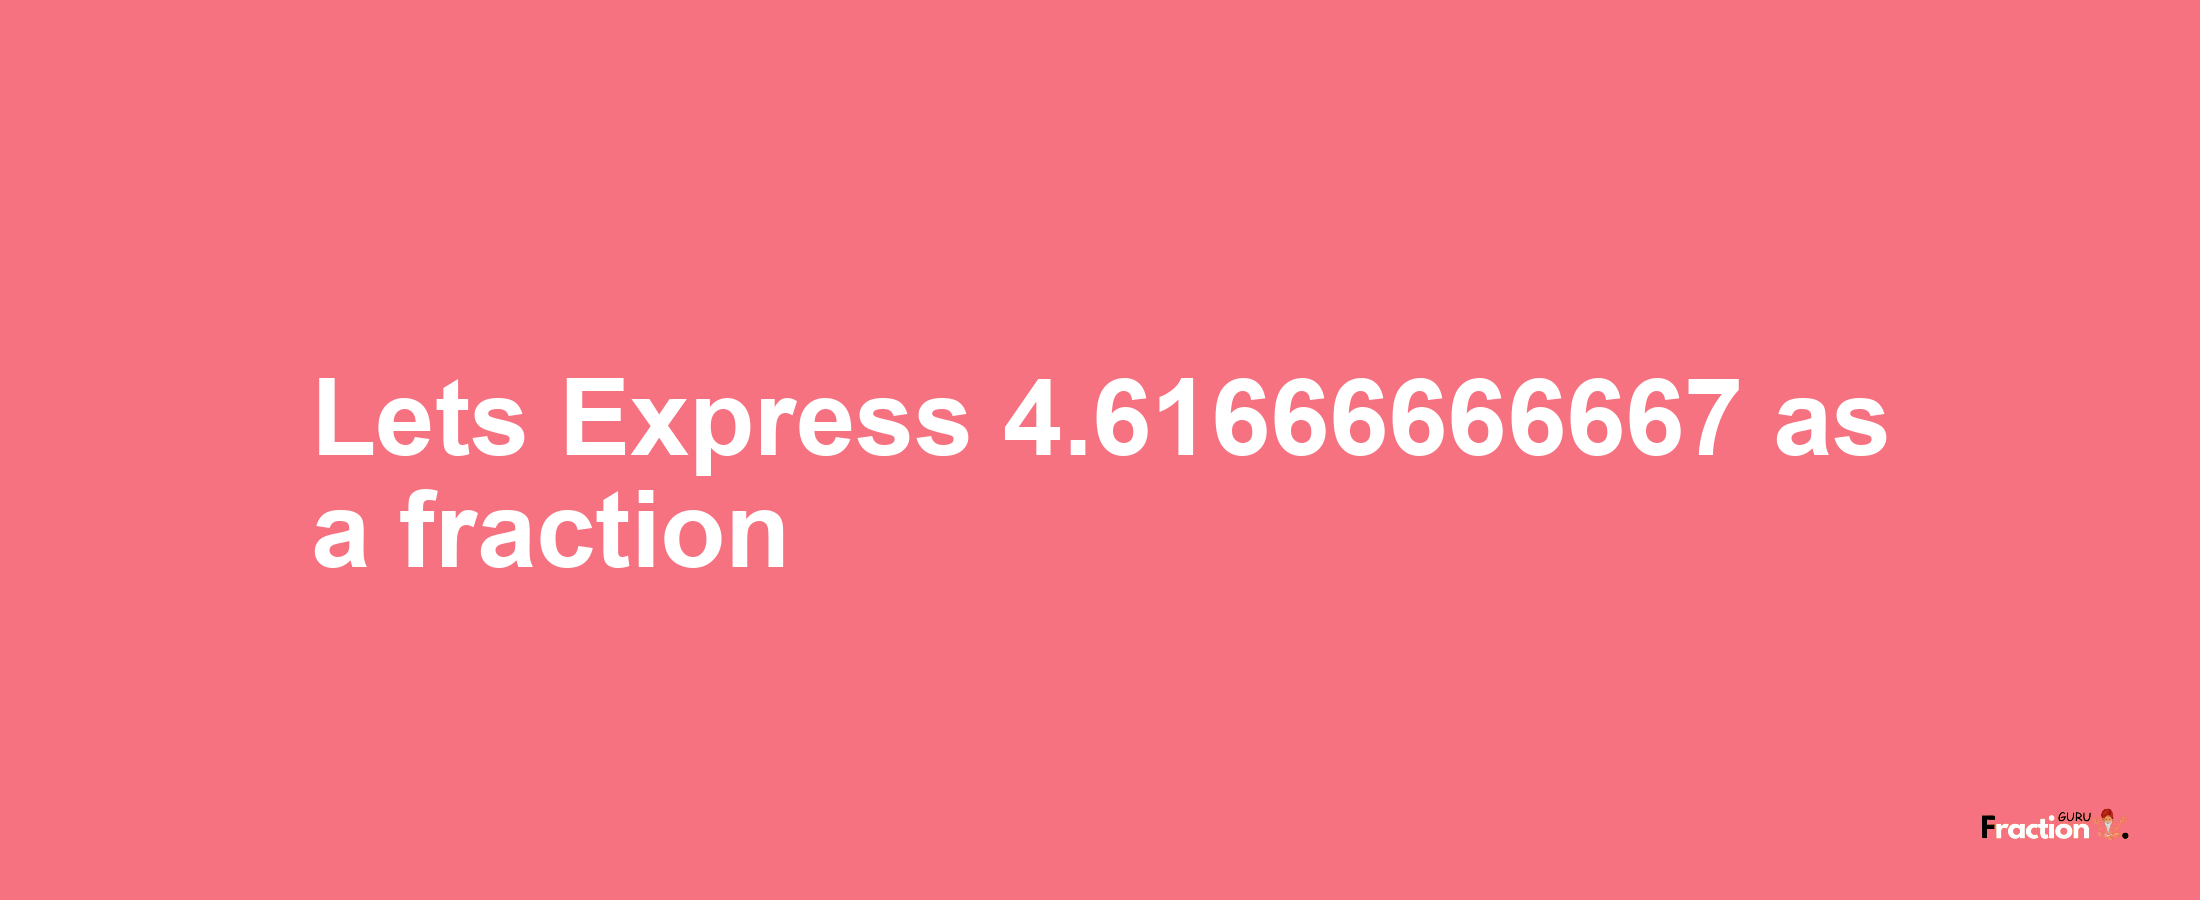 Lets Express 4.61666666667 as afraction